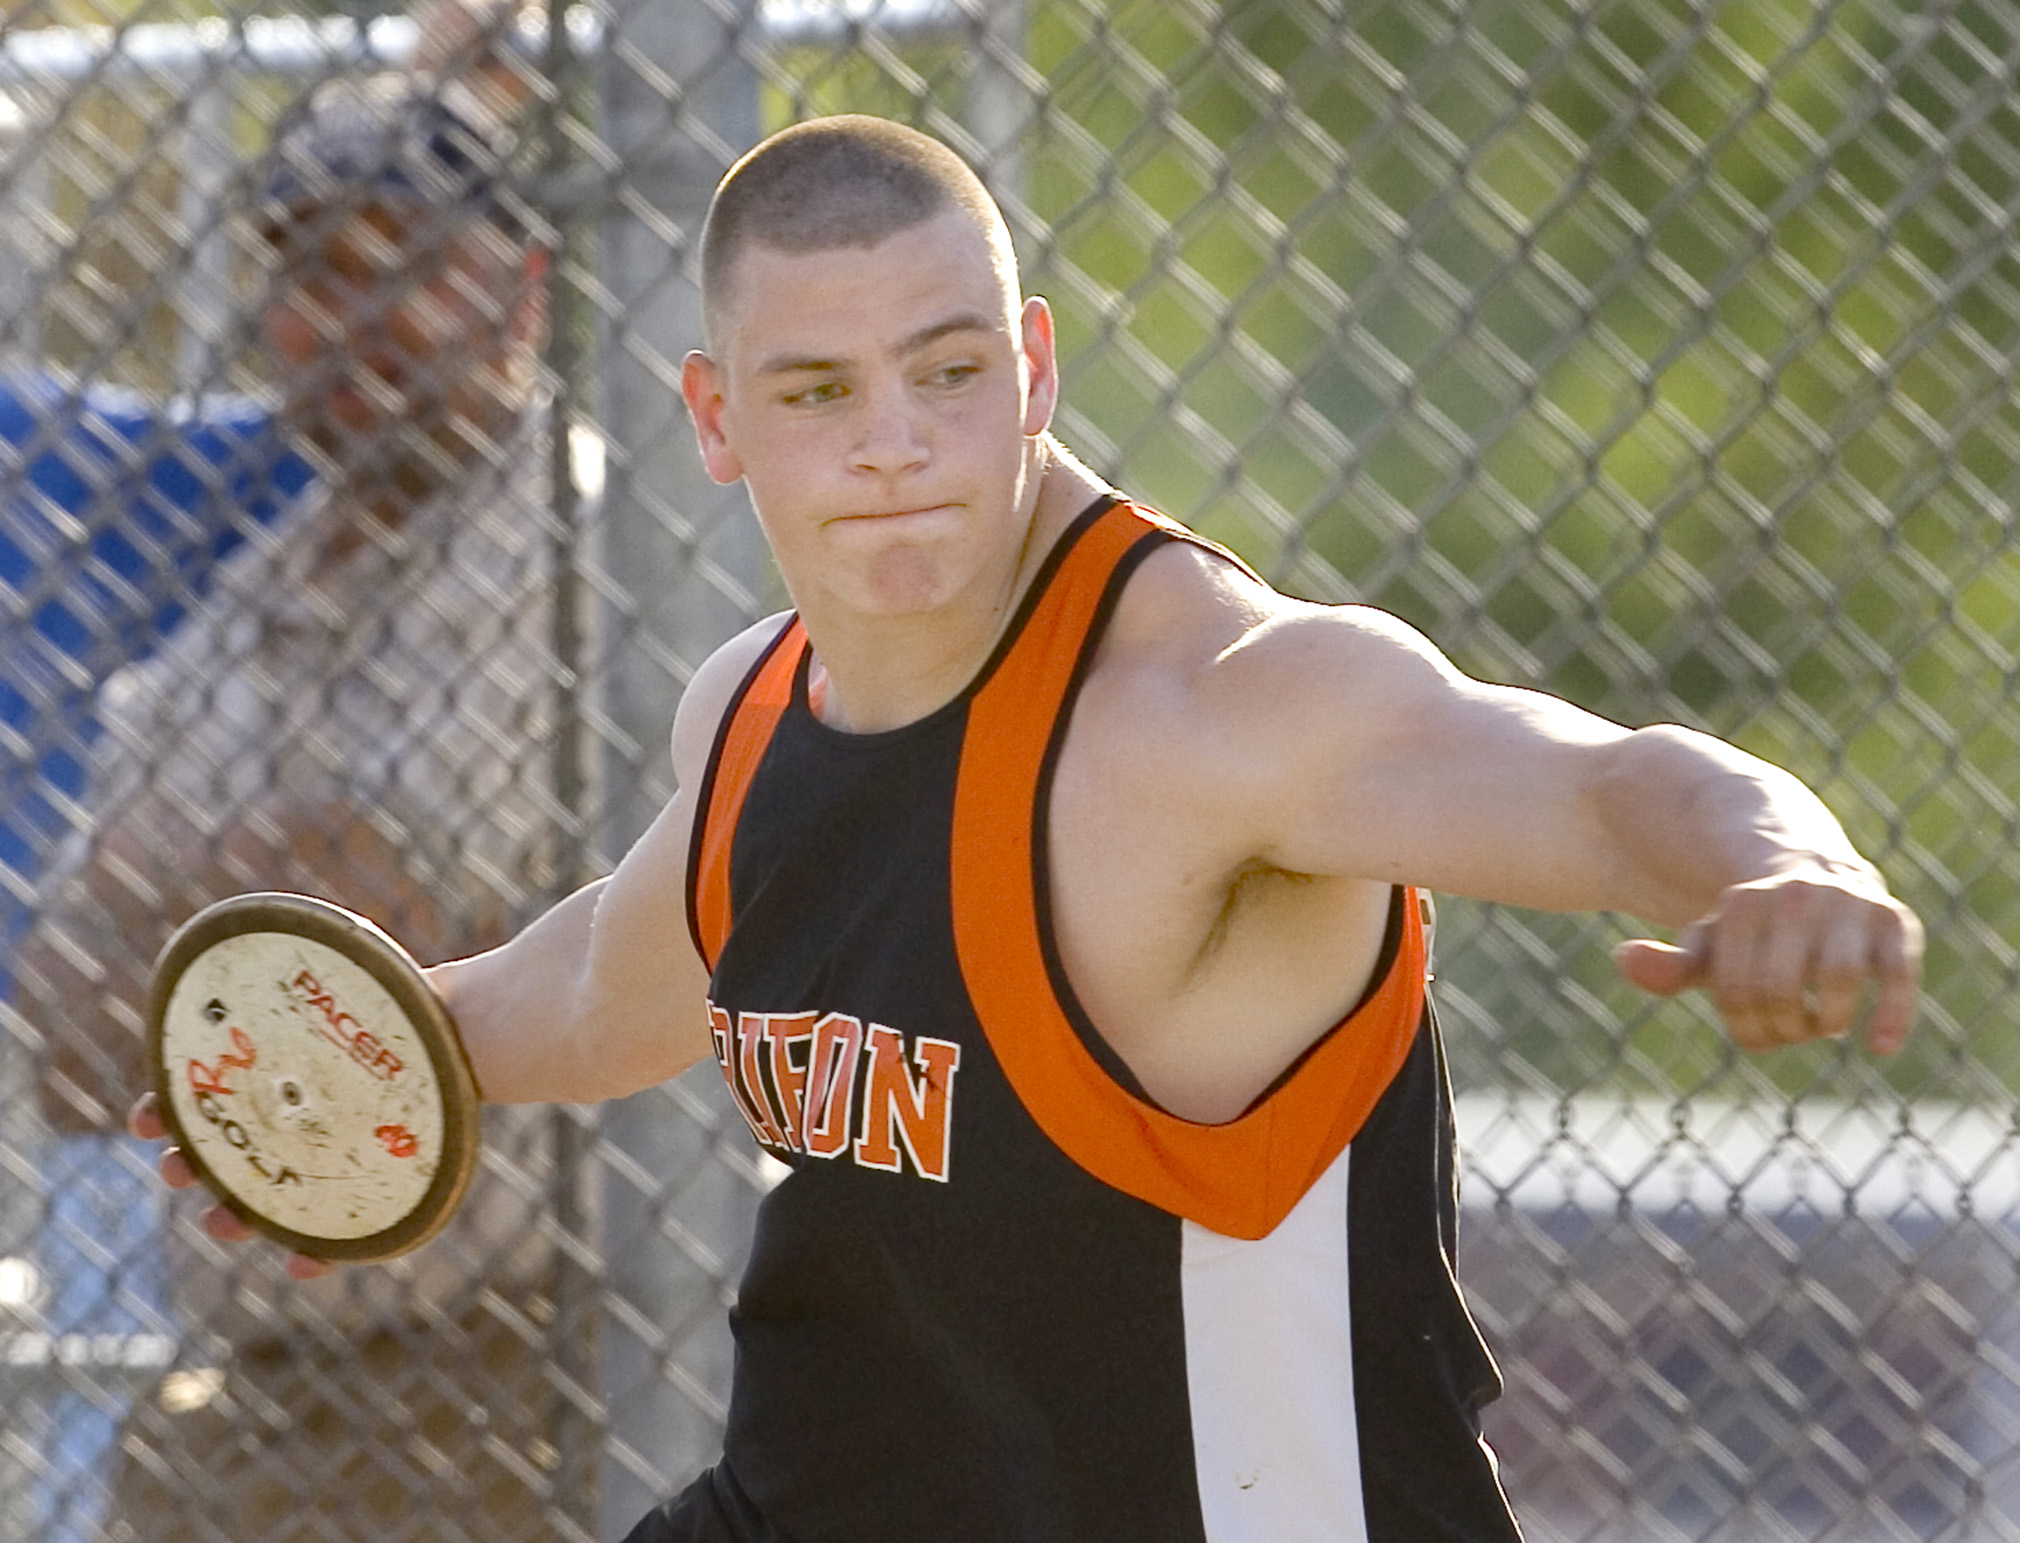 Ripon's Aaron Studt competes in the Division 2 discus at the WIAA state track and field meet in La Crosse